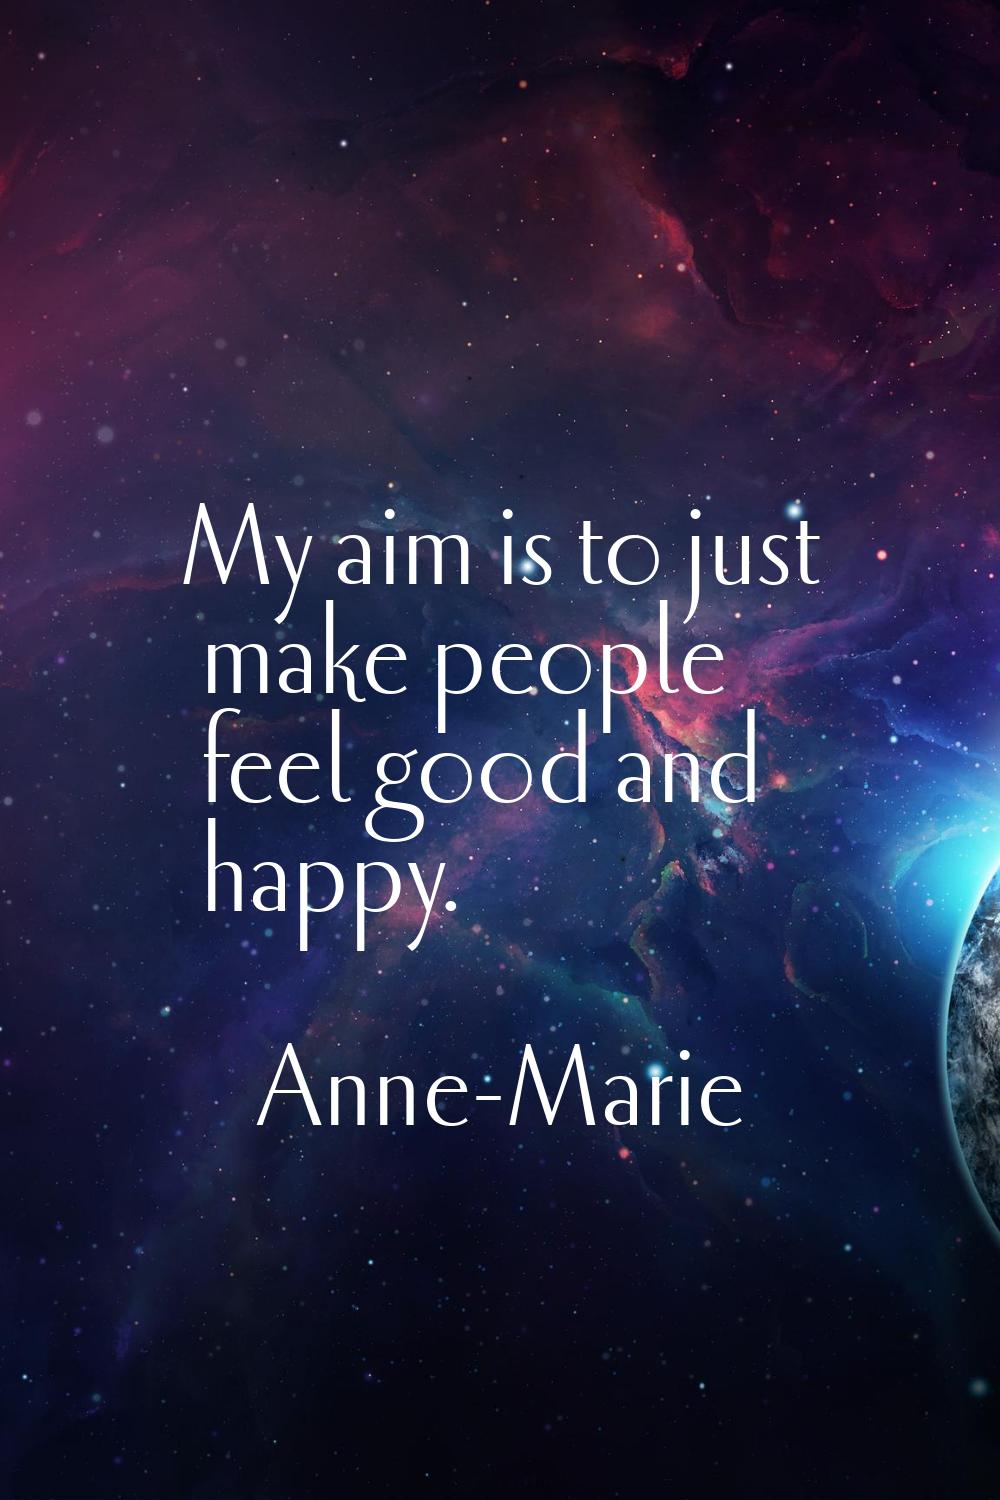 My aim is to just make people feel good and happy.